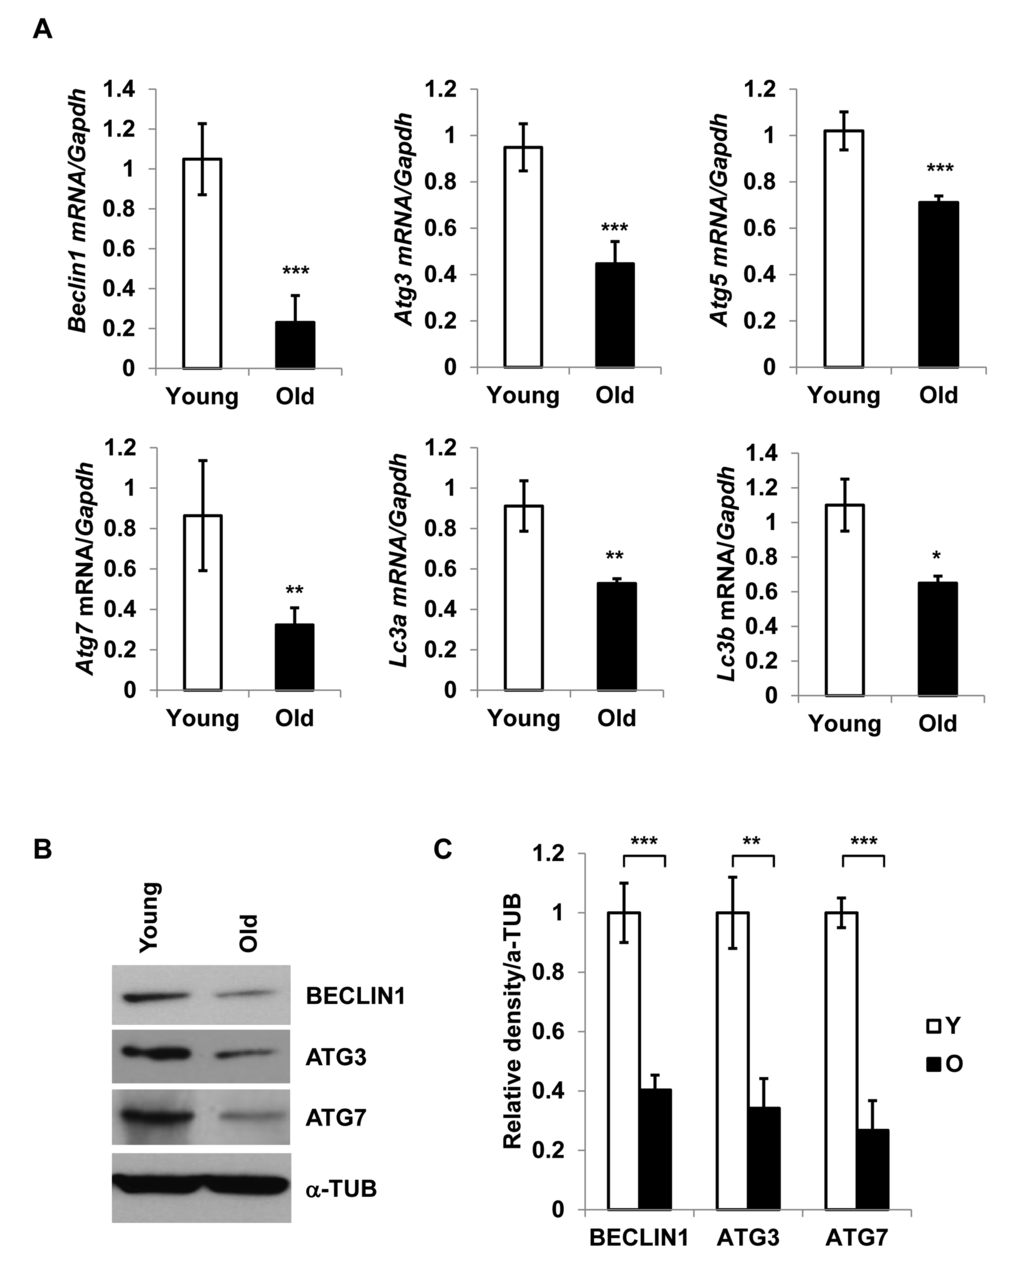 Diminished expression of autophagy gene products in aged SVFs. (A) Relative mRNA expression of autophagy genes Beclin1, Atg3, Atg5, Atg7, Lc3a and Lc3b in adipose tissue SVF of young (4 m) and old mice (20 m) analyzed by real-time PCR using Ct values. Data represented in bar diagrams are Mean + SD value of relative mRNA expression from three independent experiments where total RNA was extracted from SVFs of young (n=5) and old (n=3) mice and used as a template for one-step RT-qPCR reaction. The significance levels *pB) Protein expressions of BECLIN1, ATG3 and ATG7 were analyzed by Western blotting of SVF lysates from young (n=5) and old (n=3) mice. Data presented here are representative image of three independent experiments. The relative density of protein bands were plotted in (C). Values were expressed as Mean + SD. of three independent experiments and the significance levels * p